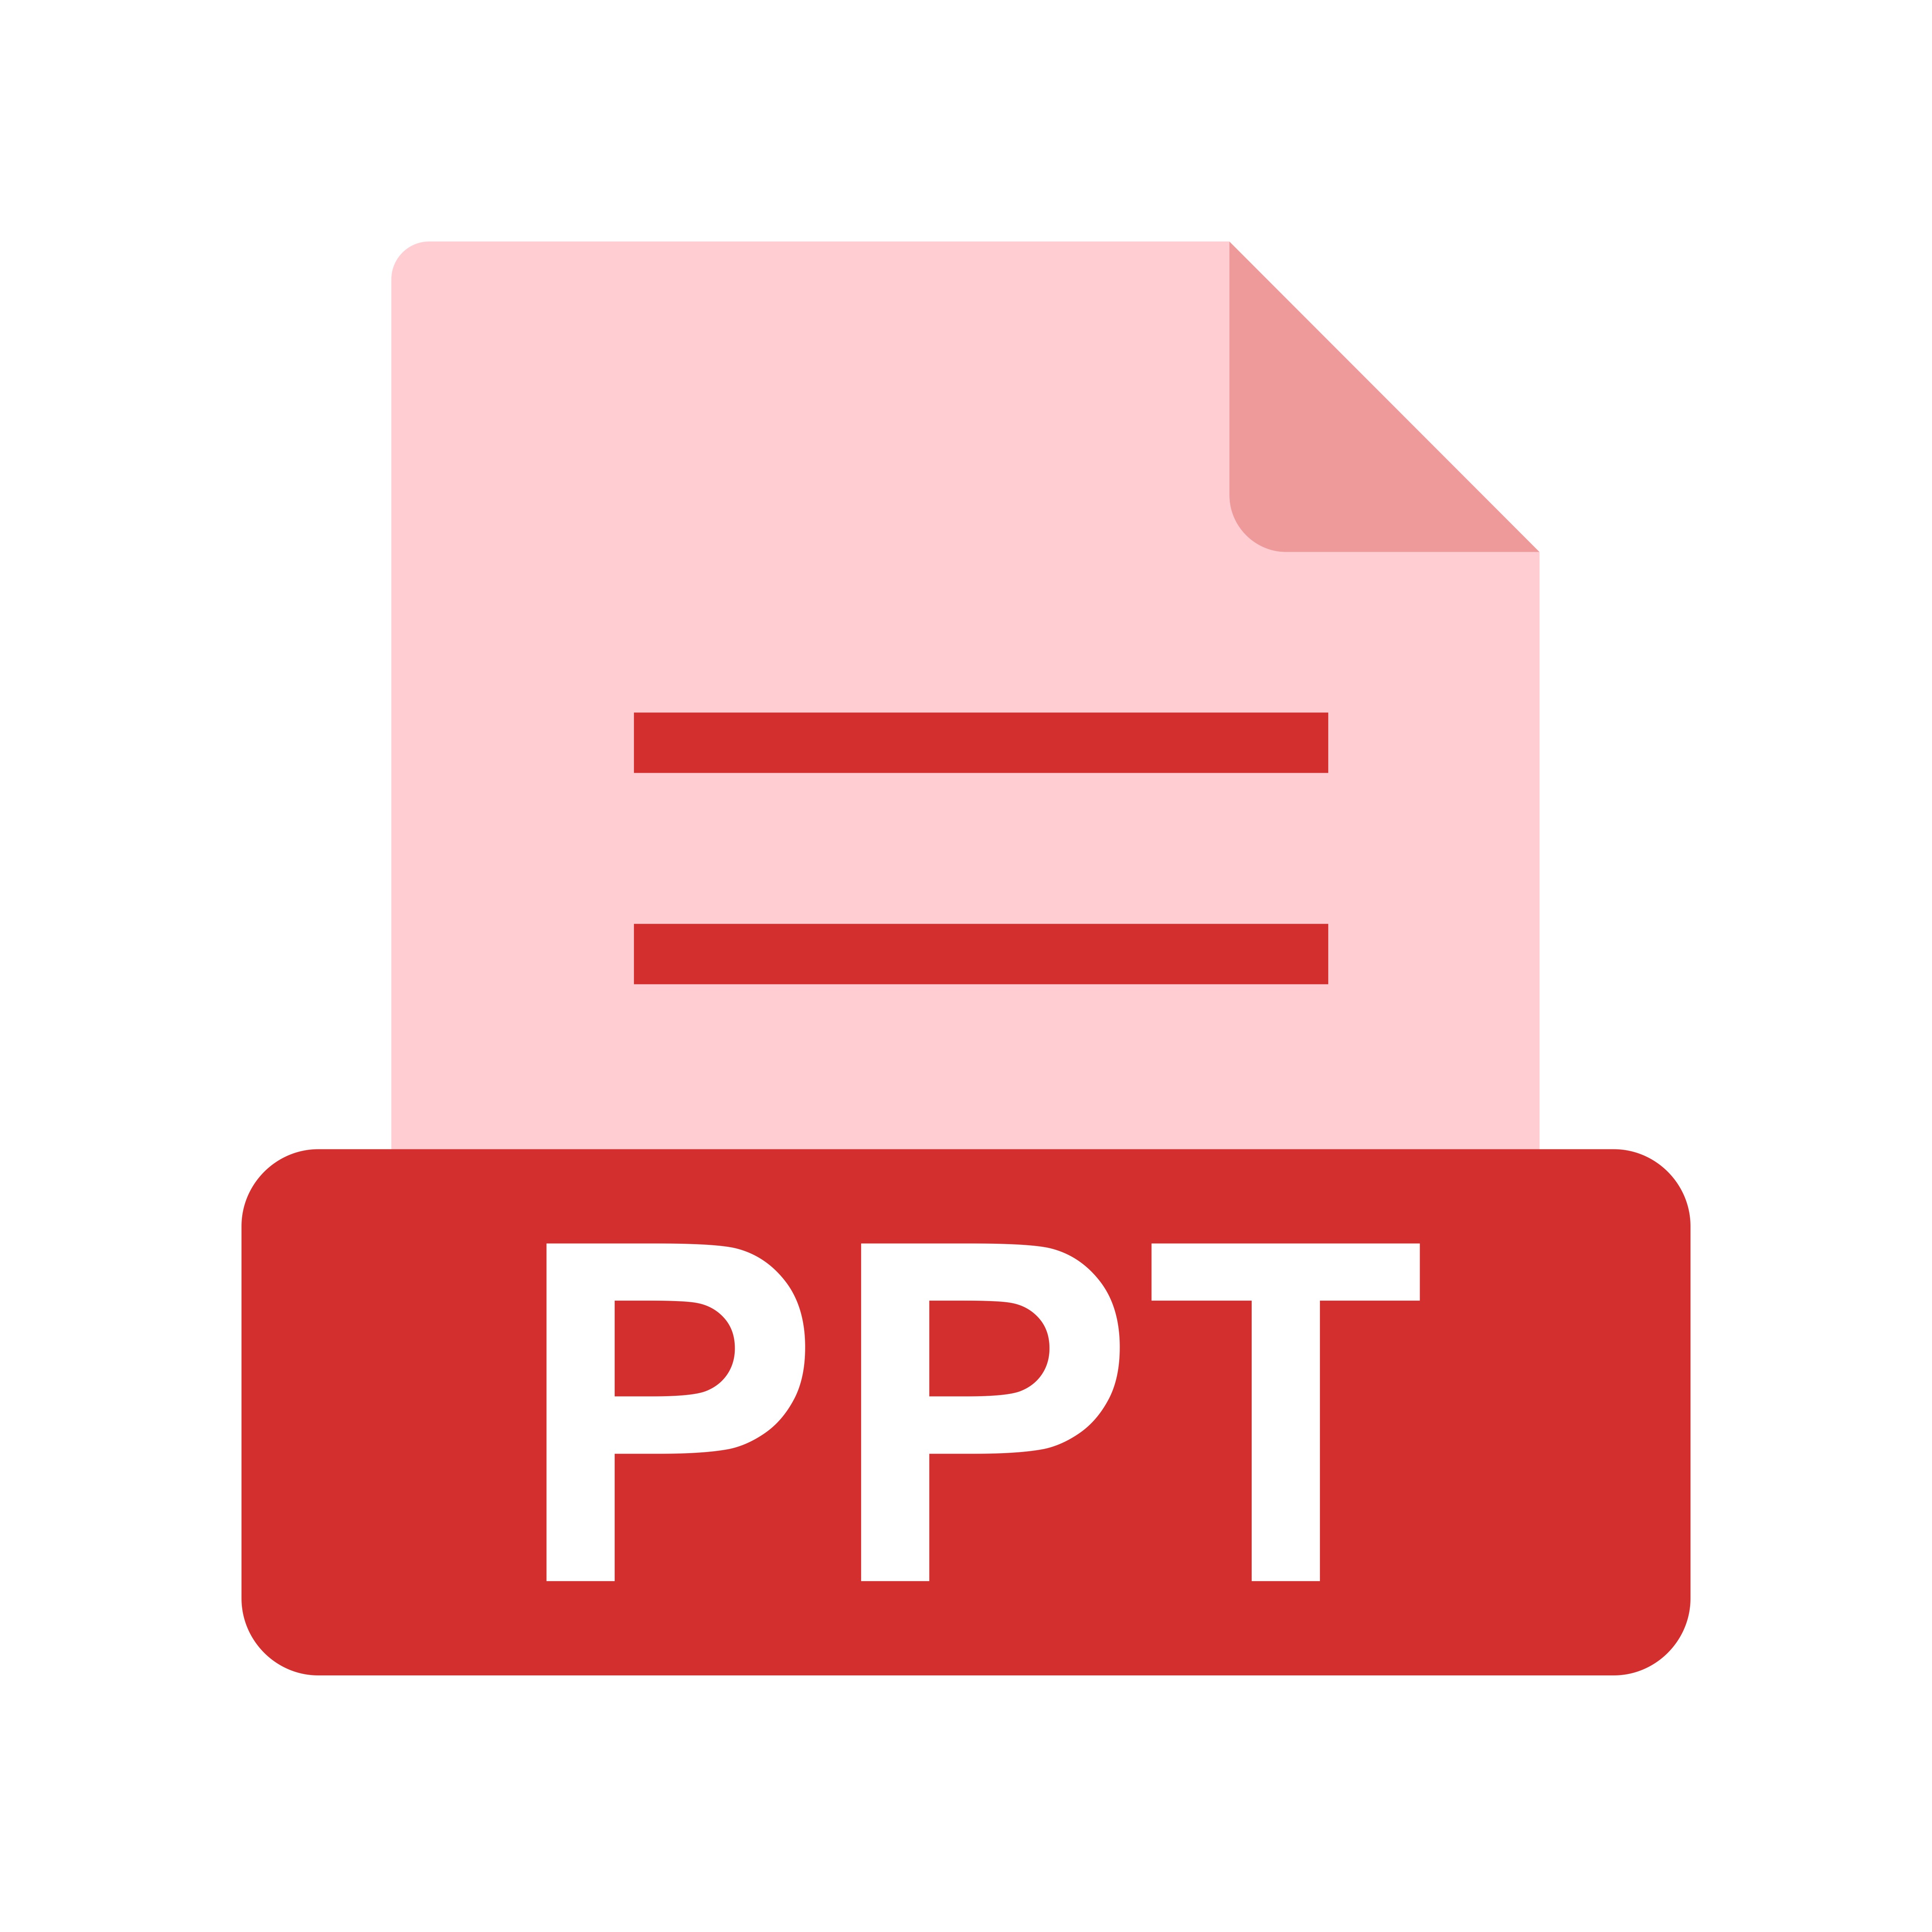 PPT, file, presentation icon vector image. Can also be used for file format, design and storage. Suitable for mobile apps, web apps and print media.